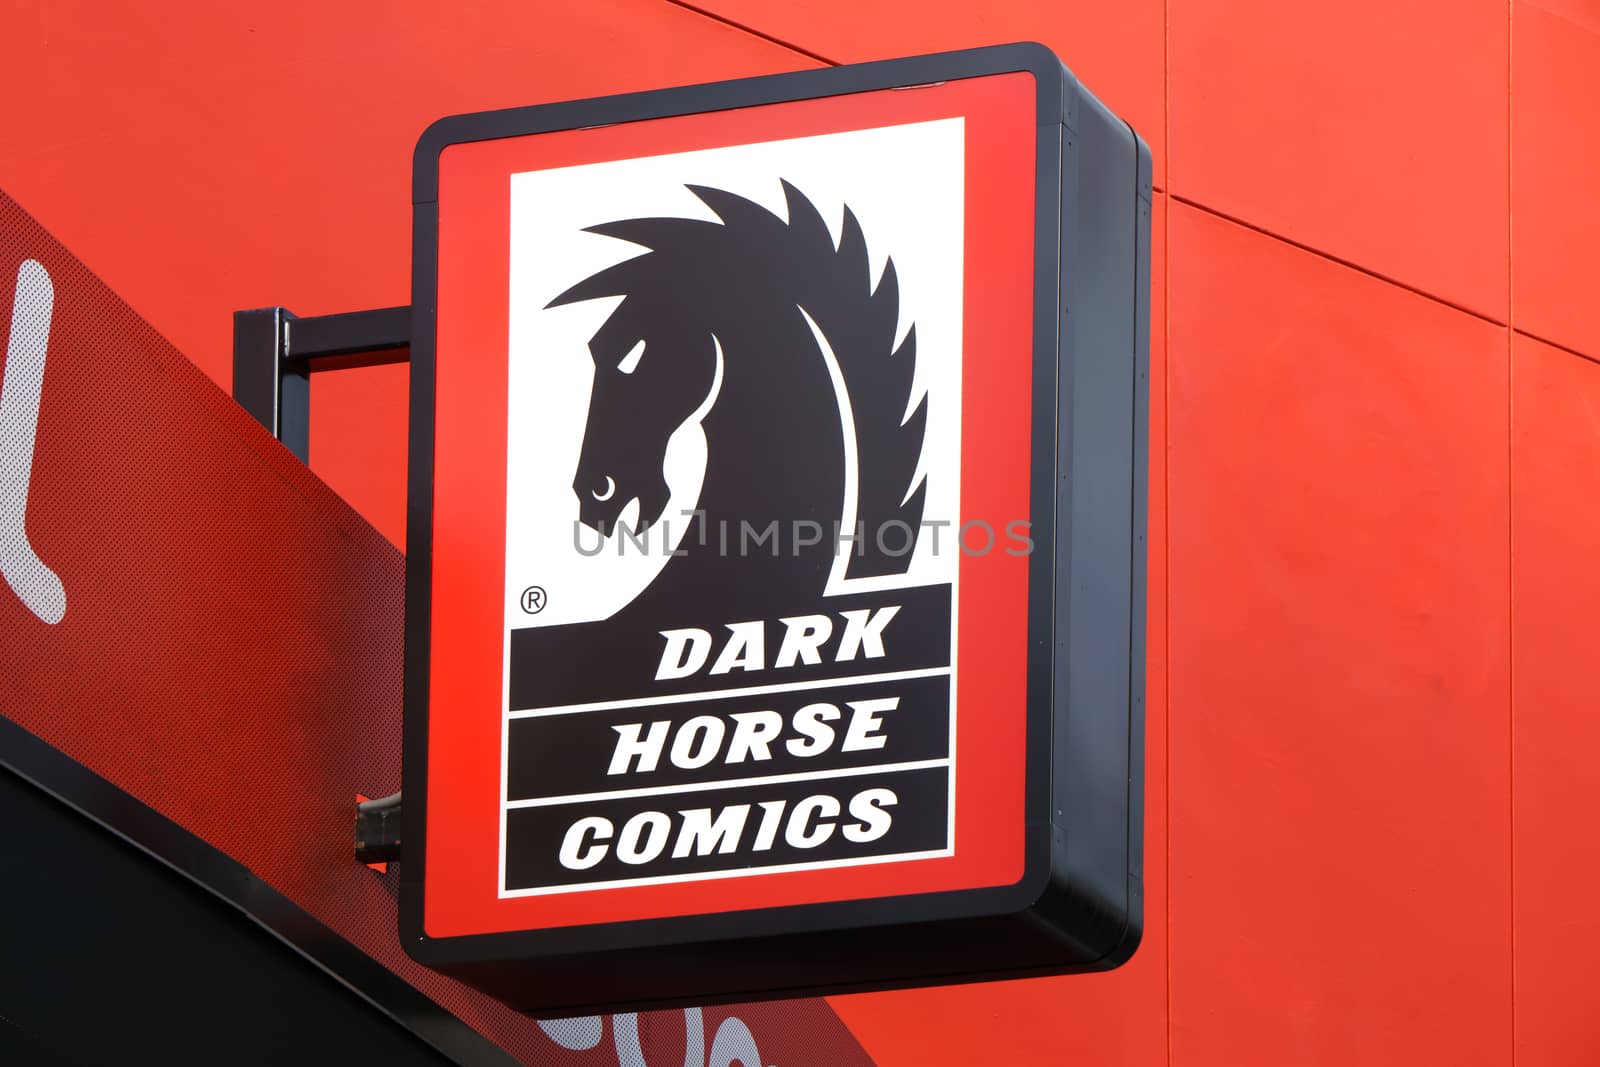 Dark Horse Comics Store Exterior and Sign by wolterk